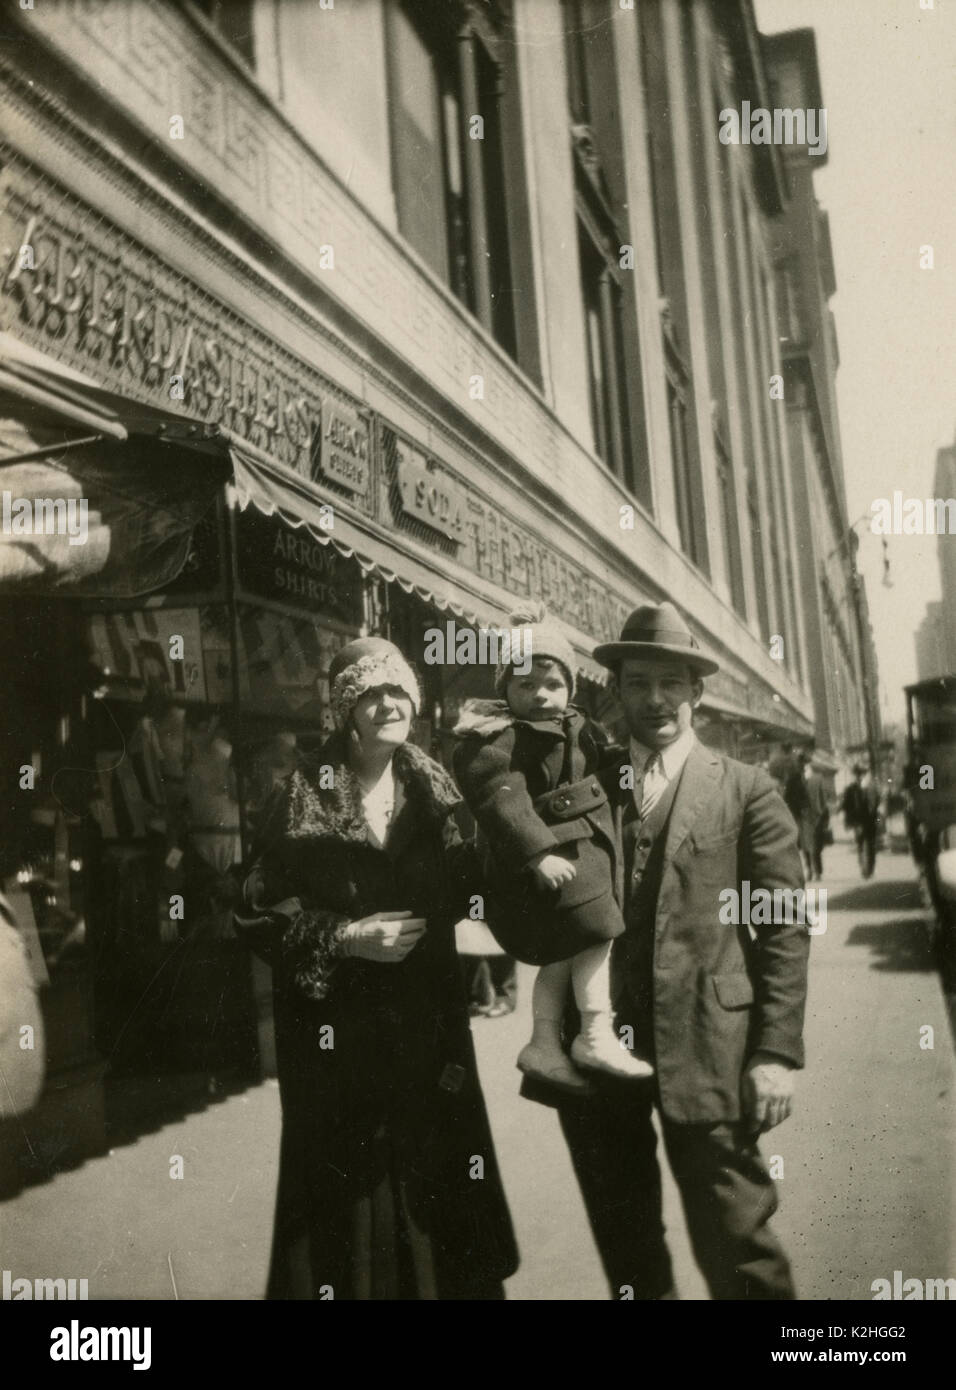 Antique c1920 photograph, family poses on the sidewalk in front of a clothing store, possibly called Hetherington Haberdashers. Signage is visible for Arrow Shirts and Soda. LOCATION UNKNOWN, possibly New York City. SOURCE: ORIGINAL PHOTOGRAPH. Stock Photo